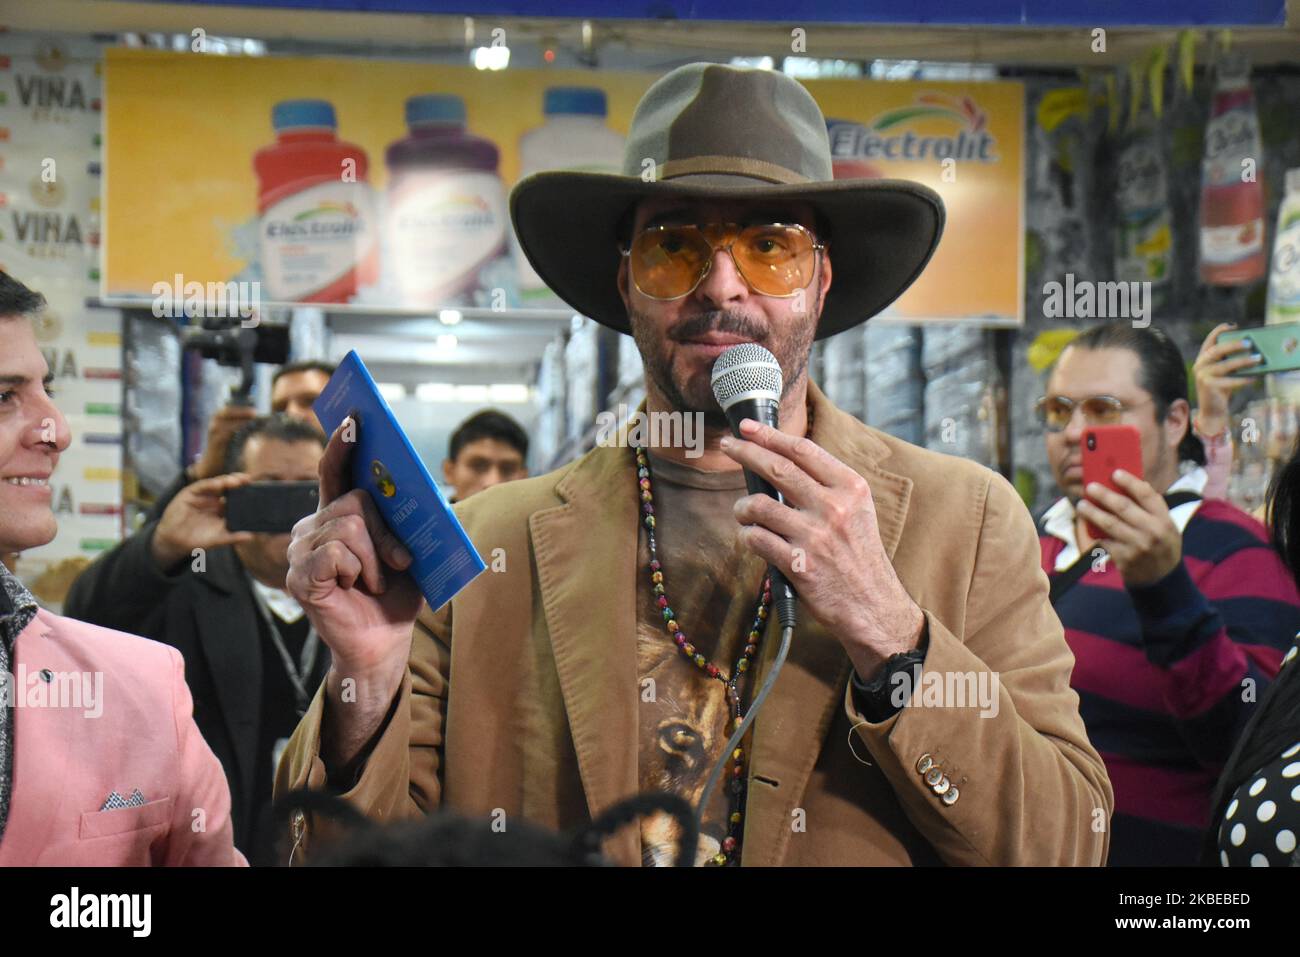 Singer Pablo Montero attends at Central de Abastos market to deliver toys to children as part of The Kings Day on January 11, 2020 in Mexico City, Mexico (Photo by Eyepix/NurPhoto) Stock Photo